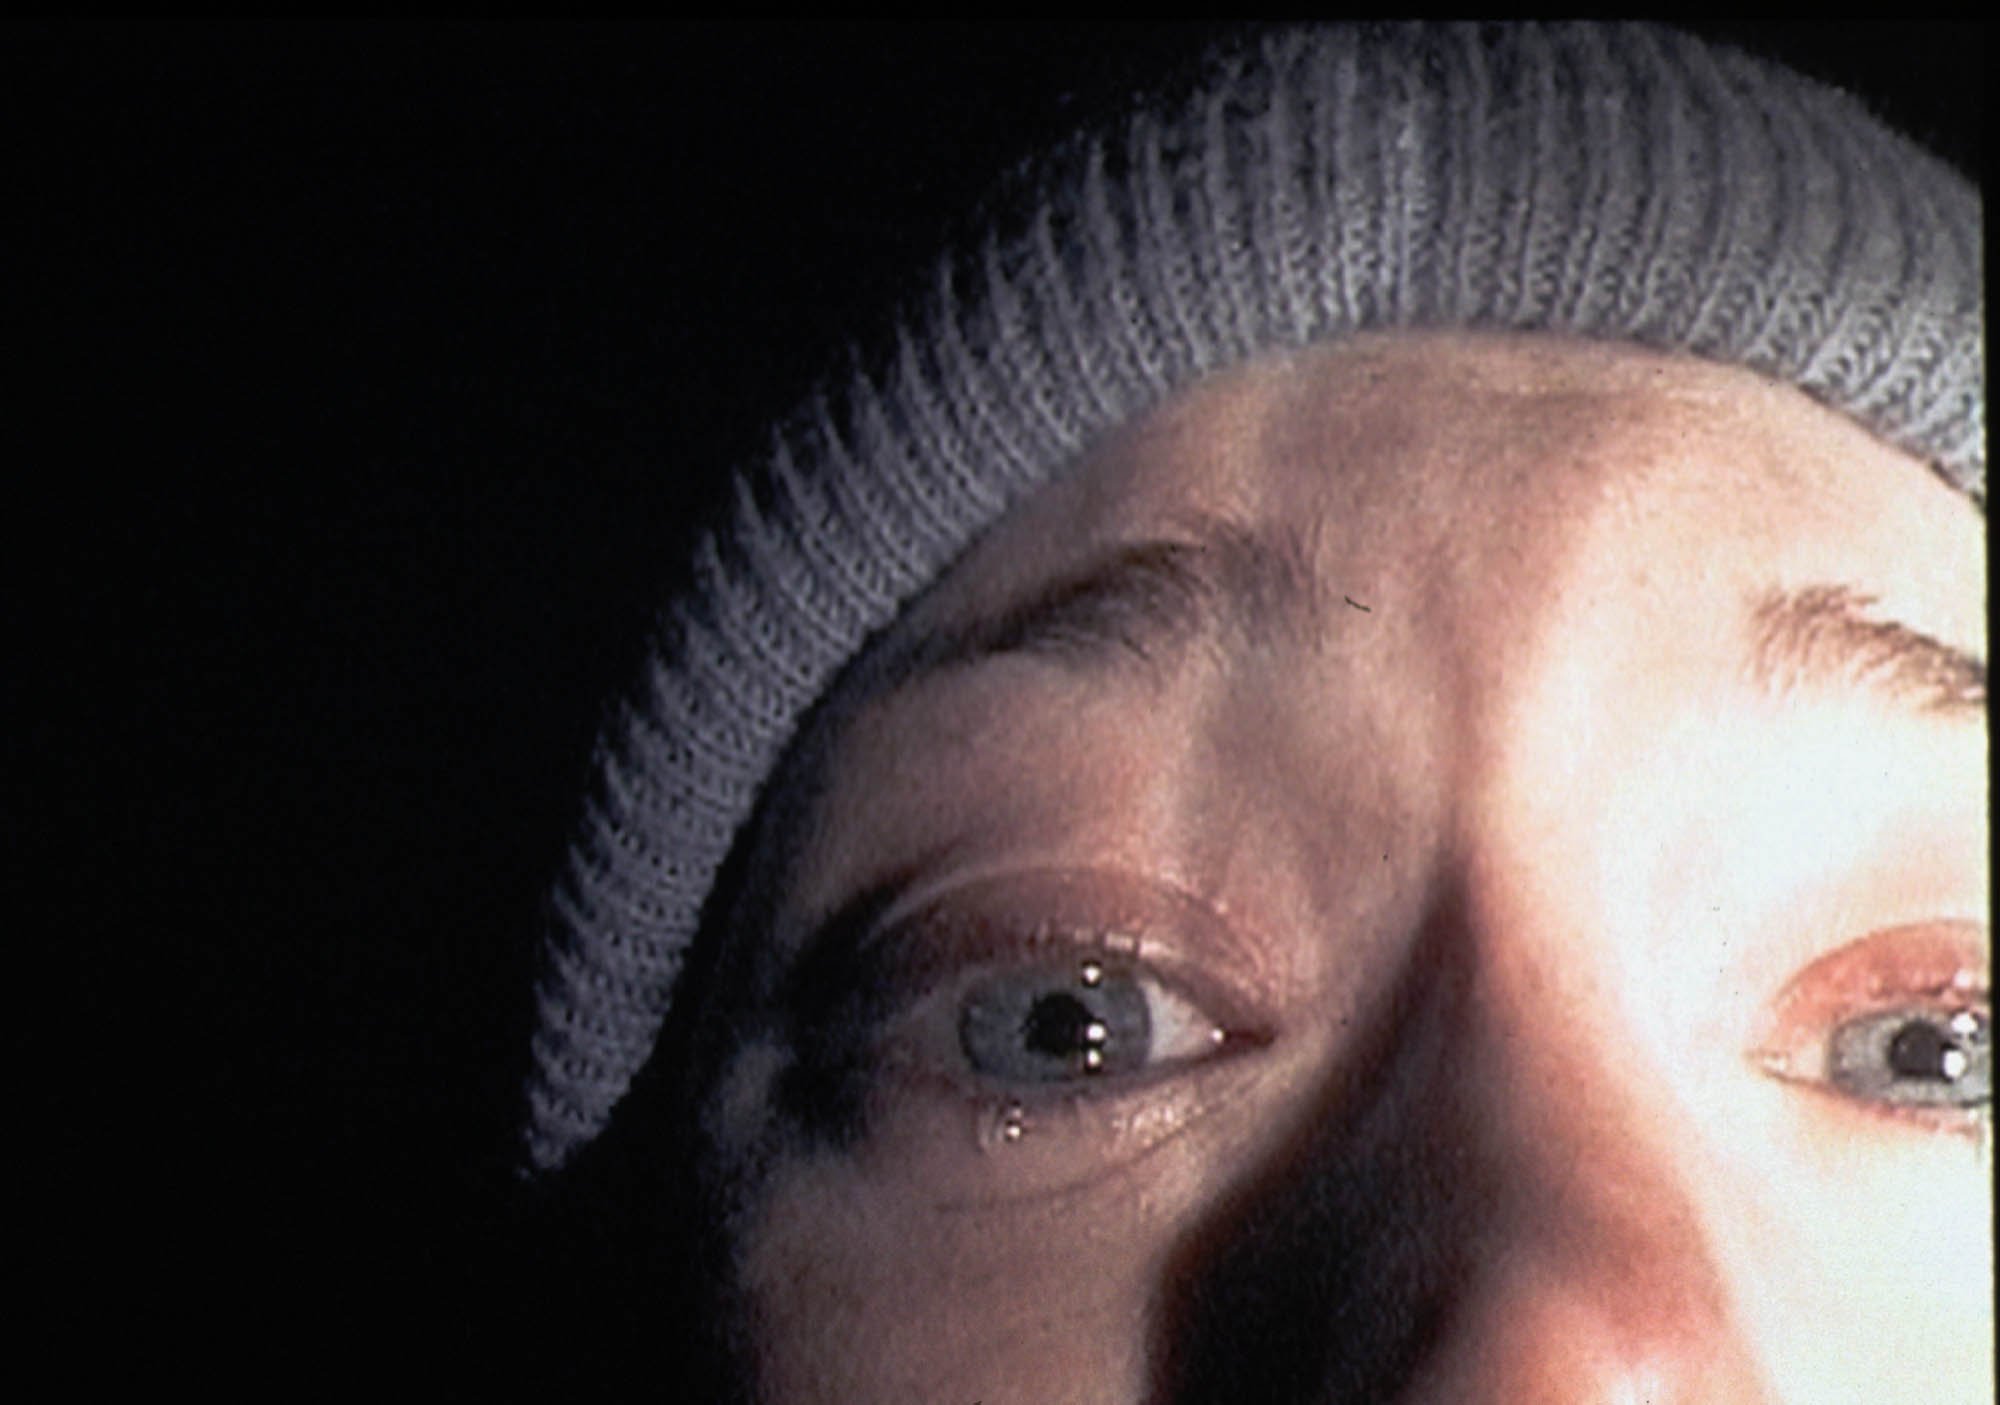 The Blair Witch Project actor Heather Donahue's eyes and nose in the film.